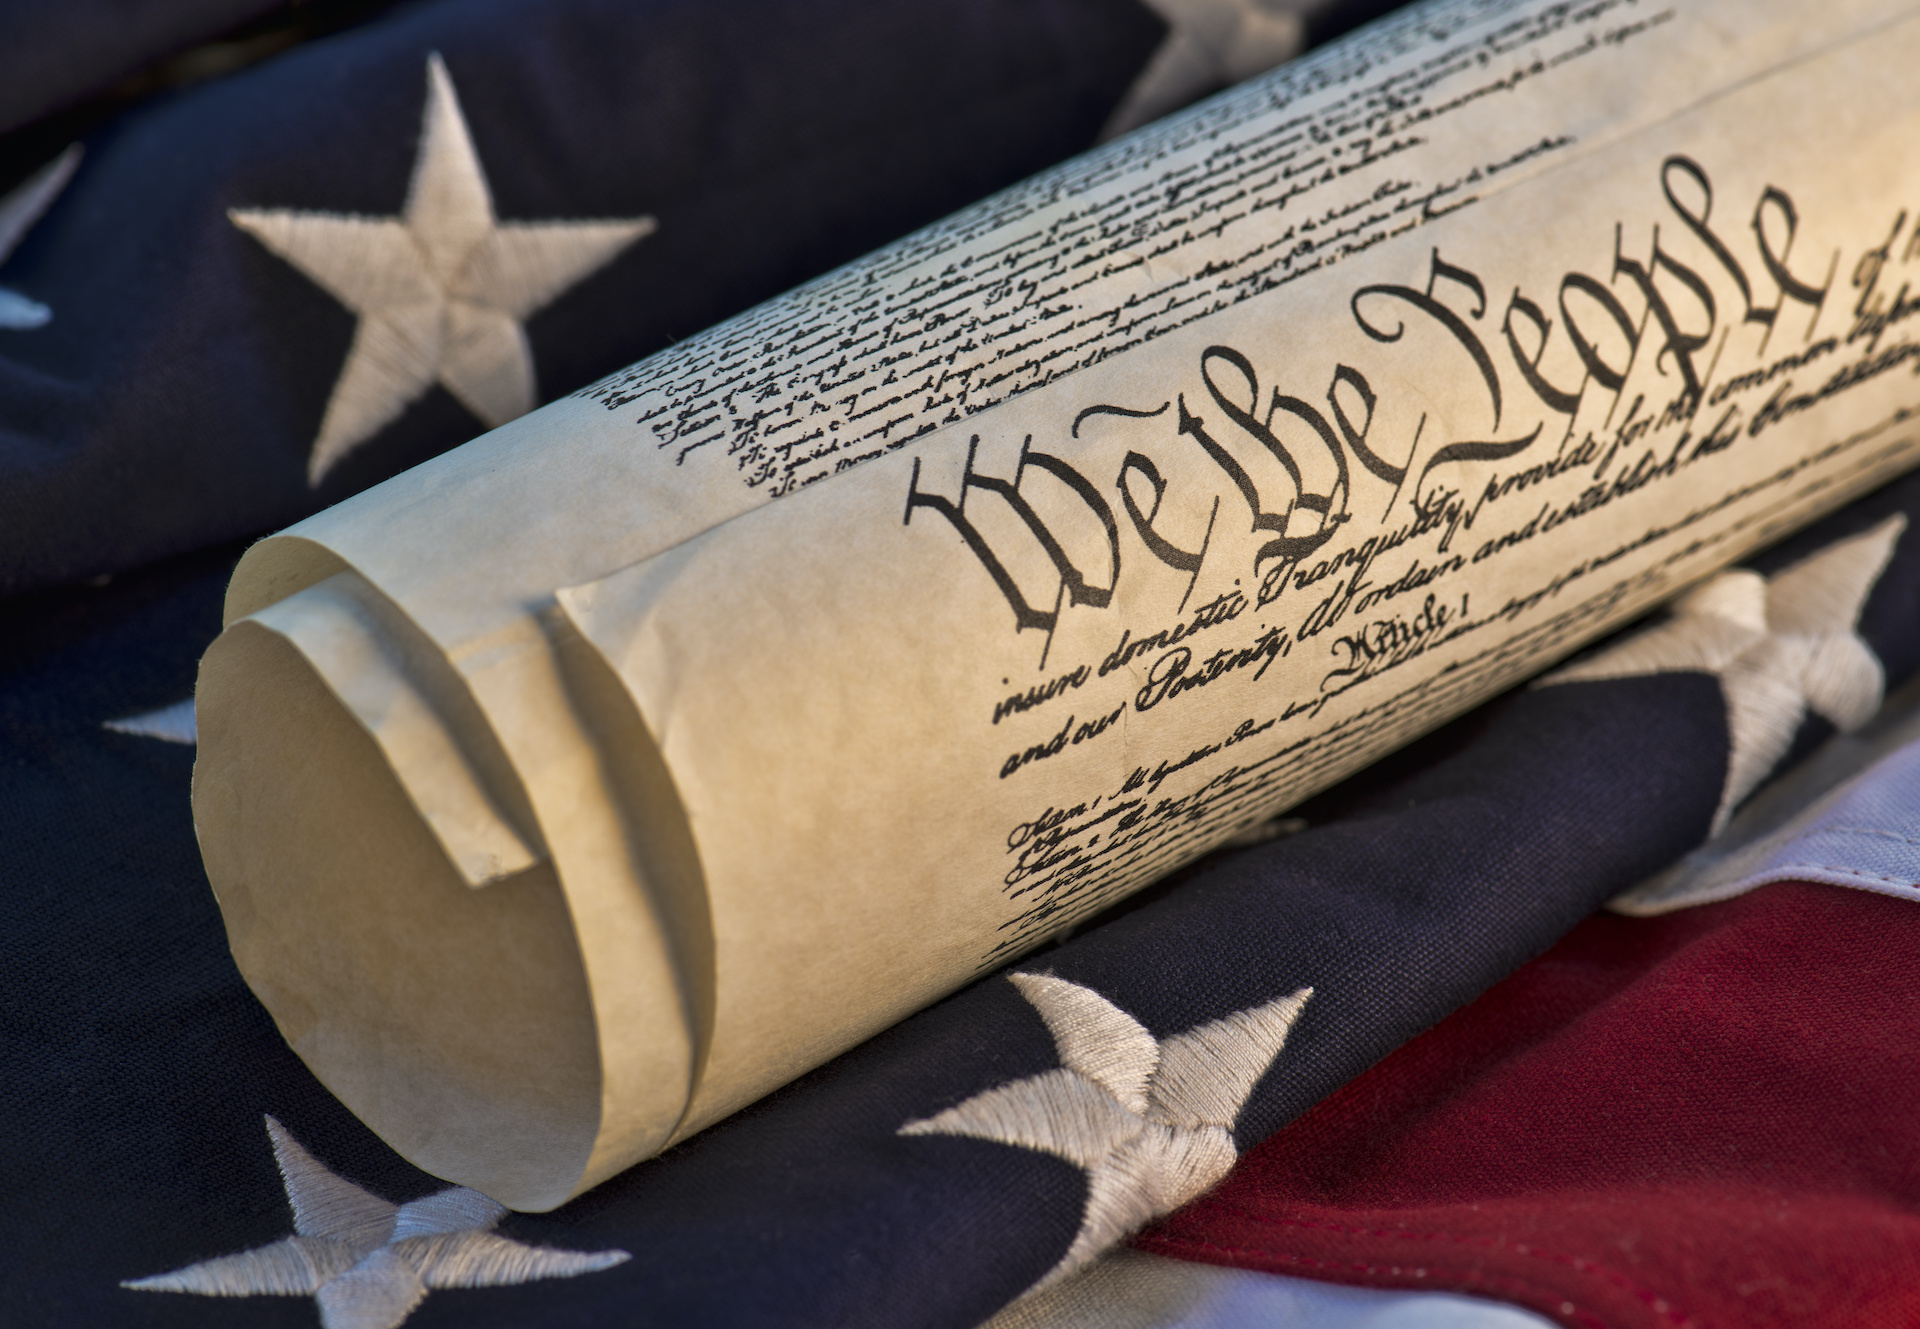 Photo: U.S. Constitution | By Justasc